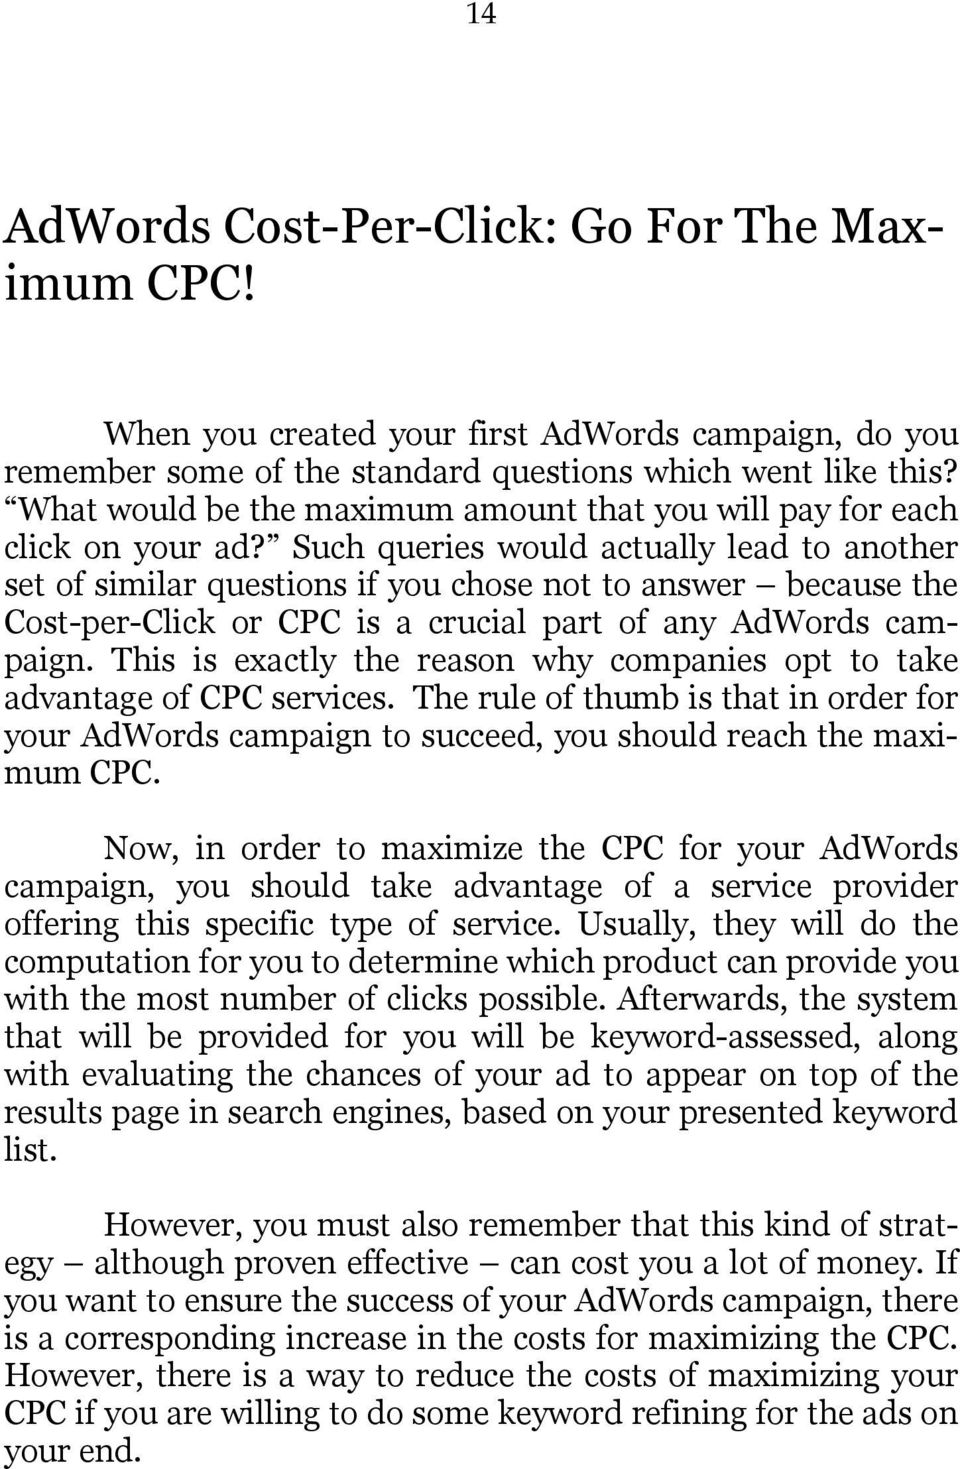 Such queries would actually lead to another set of similar questions if you chose not to answer because the Cost-per-Click or CPC is a crucial part of any AdWords campaign.